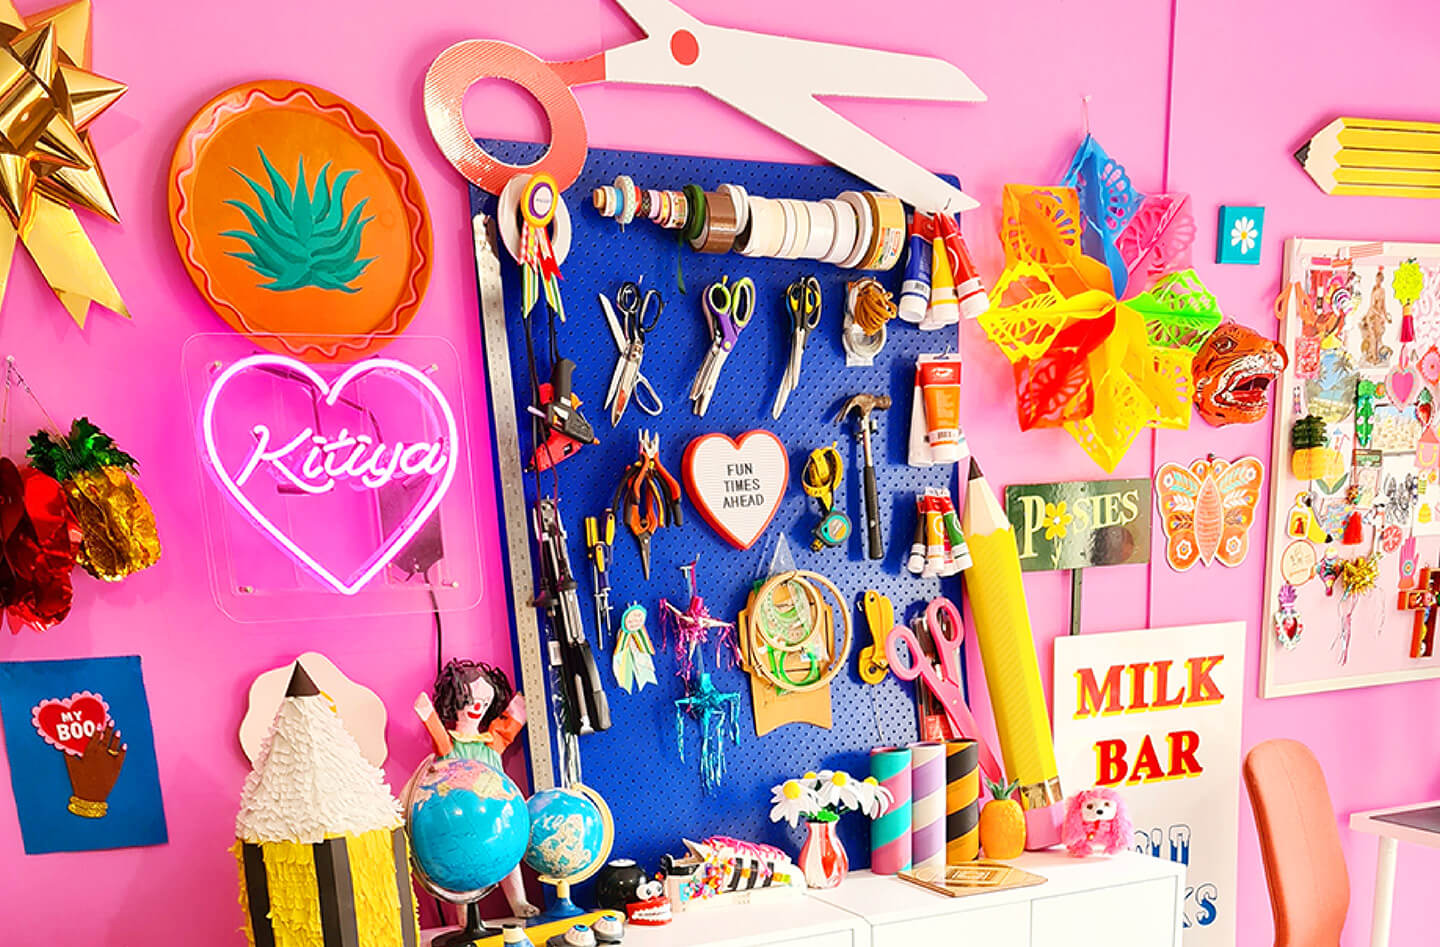 Brand identity case study image showing Kitiya Palaskas’ colourful studio space. From neon and vintage signs, paper ornaments, a blue pegboard and the bright pink walls, the space feels lively.